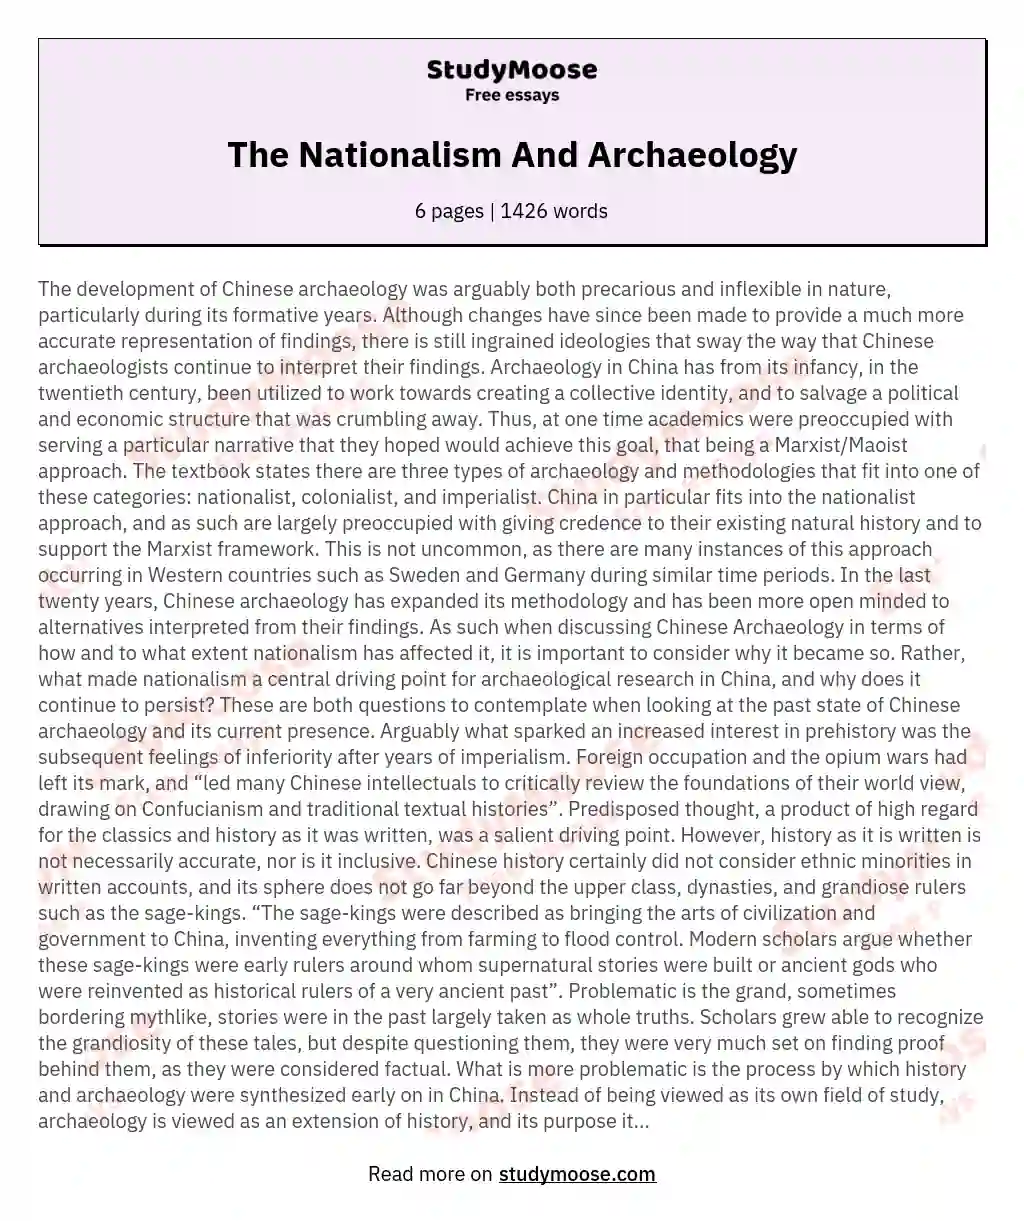 The Nationalism And Archaeology essay